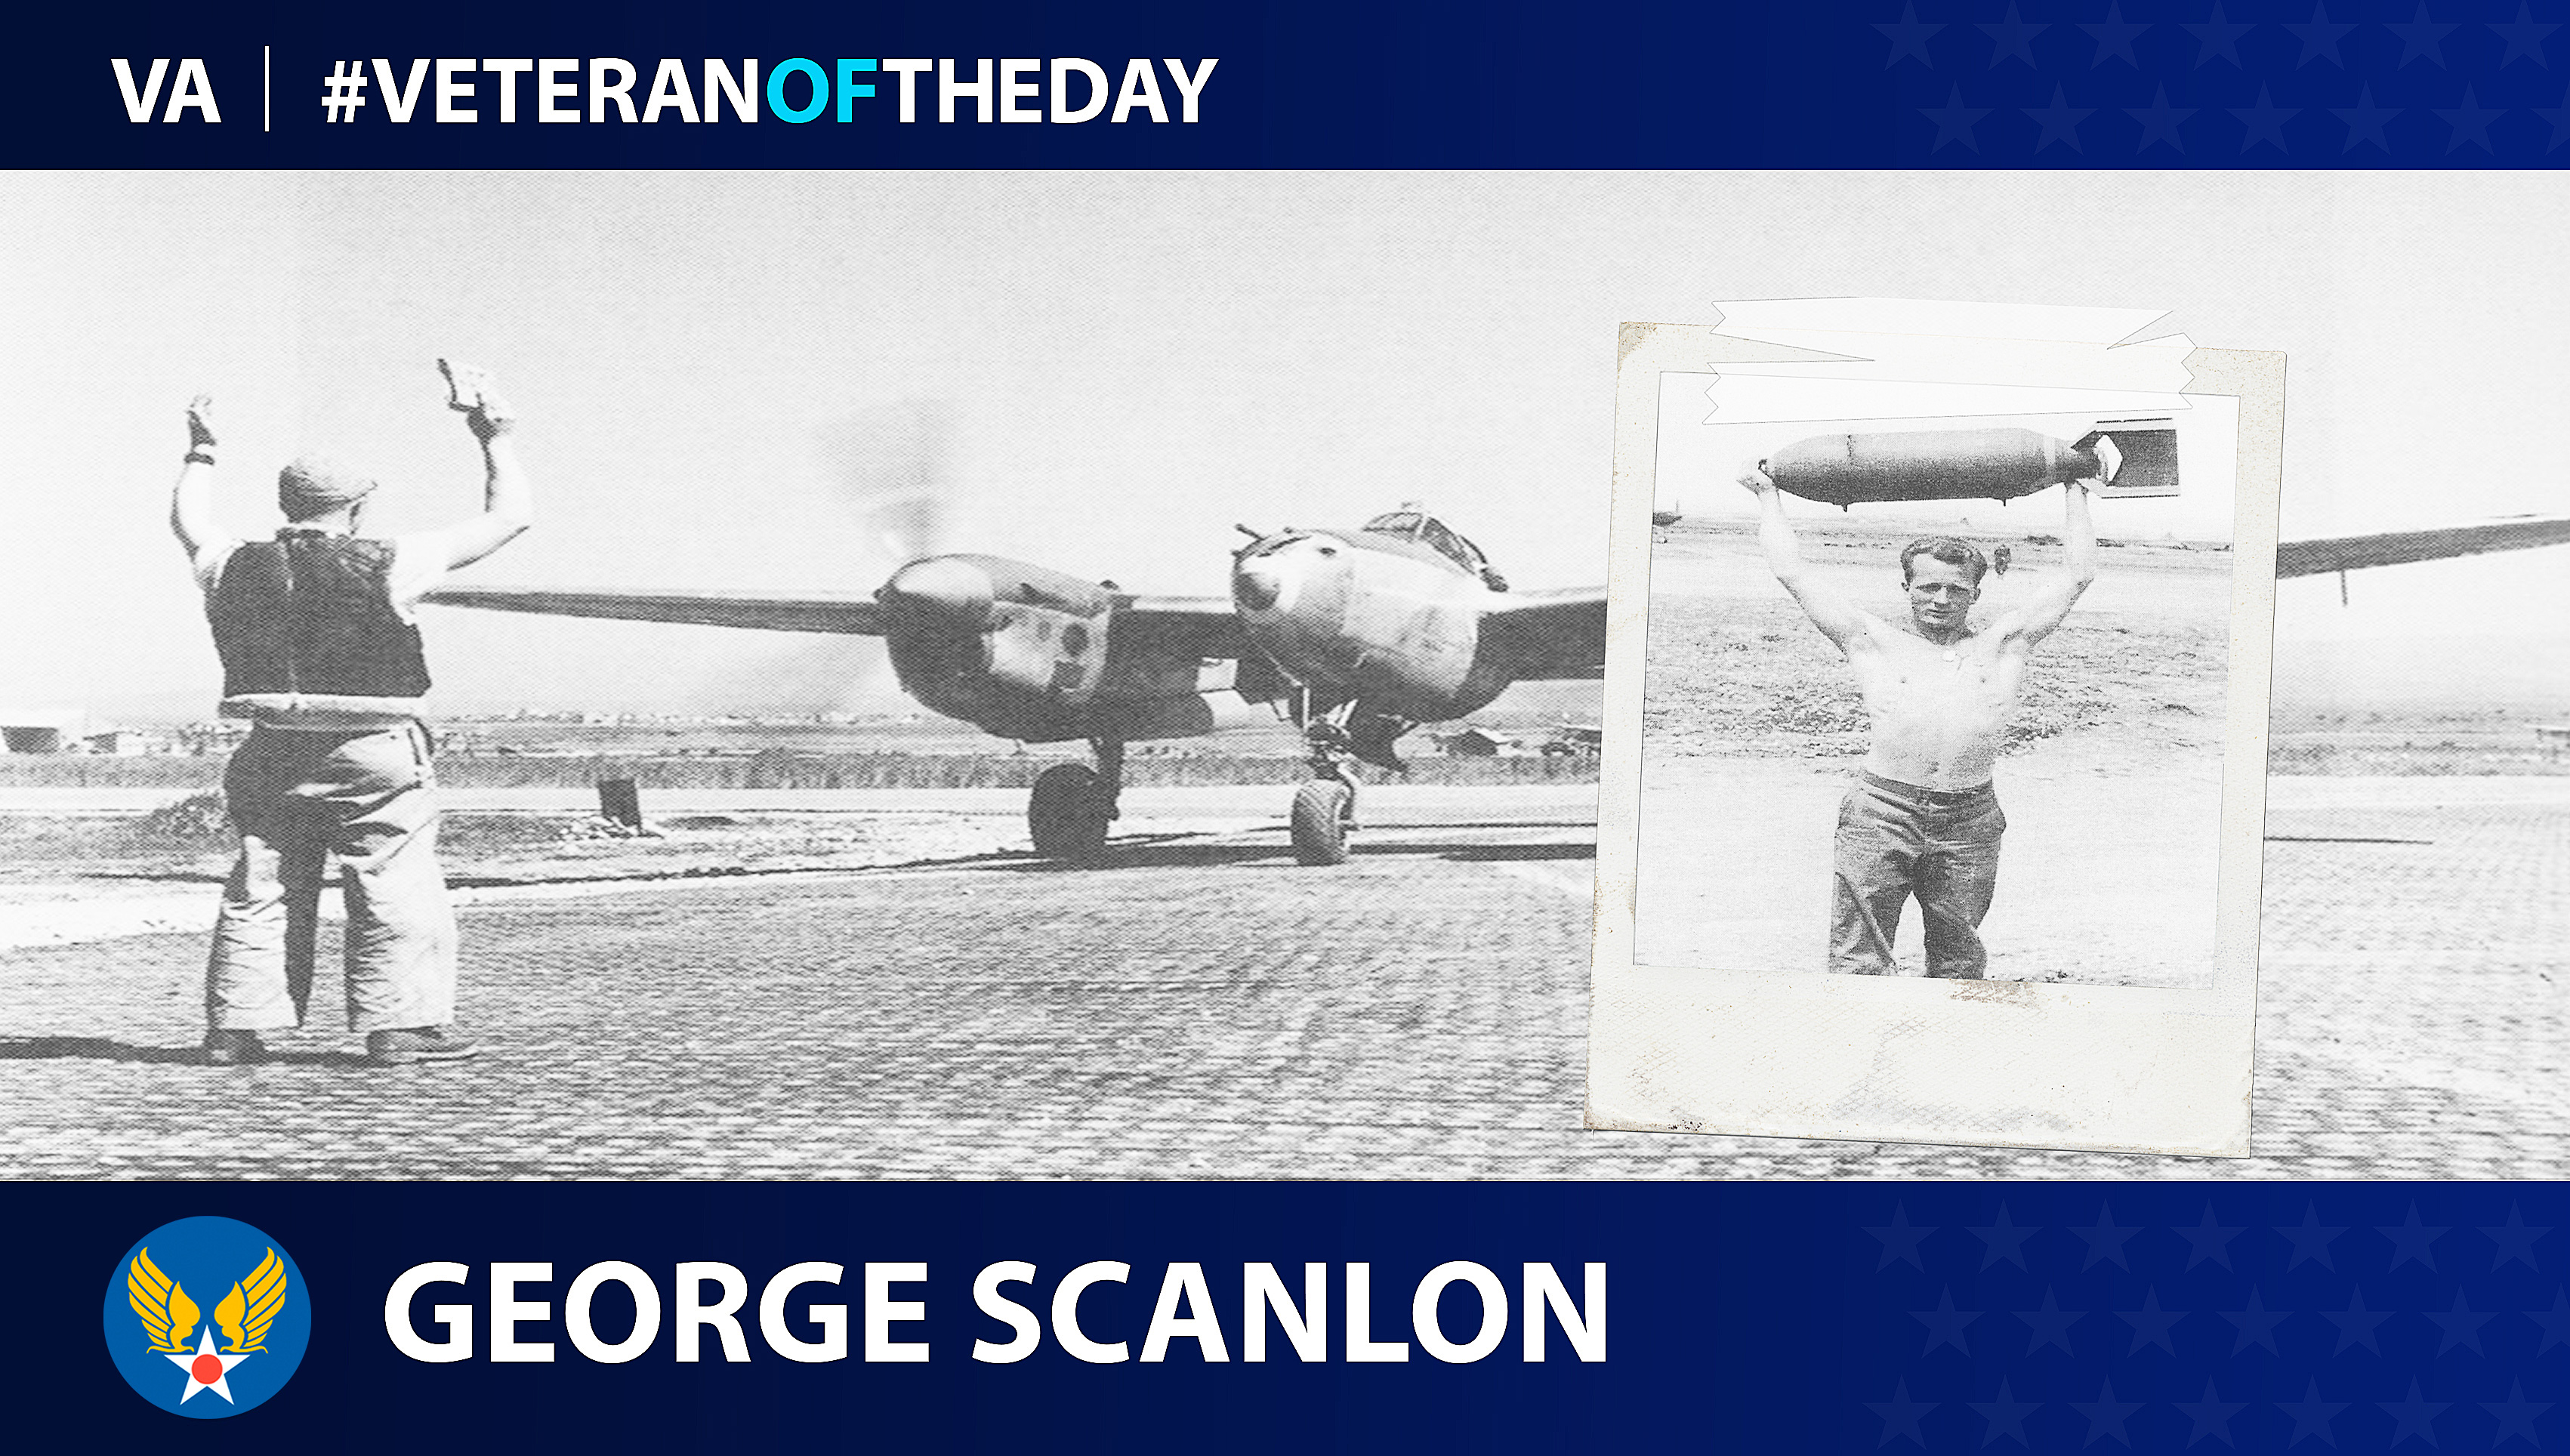 Army Air Forces Veteran George R. Scanlon is today's Veteran of the Day.